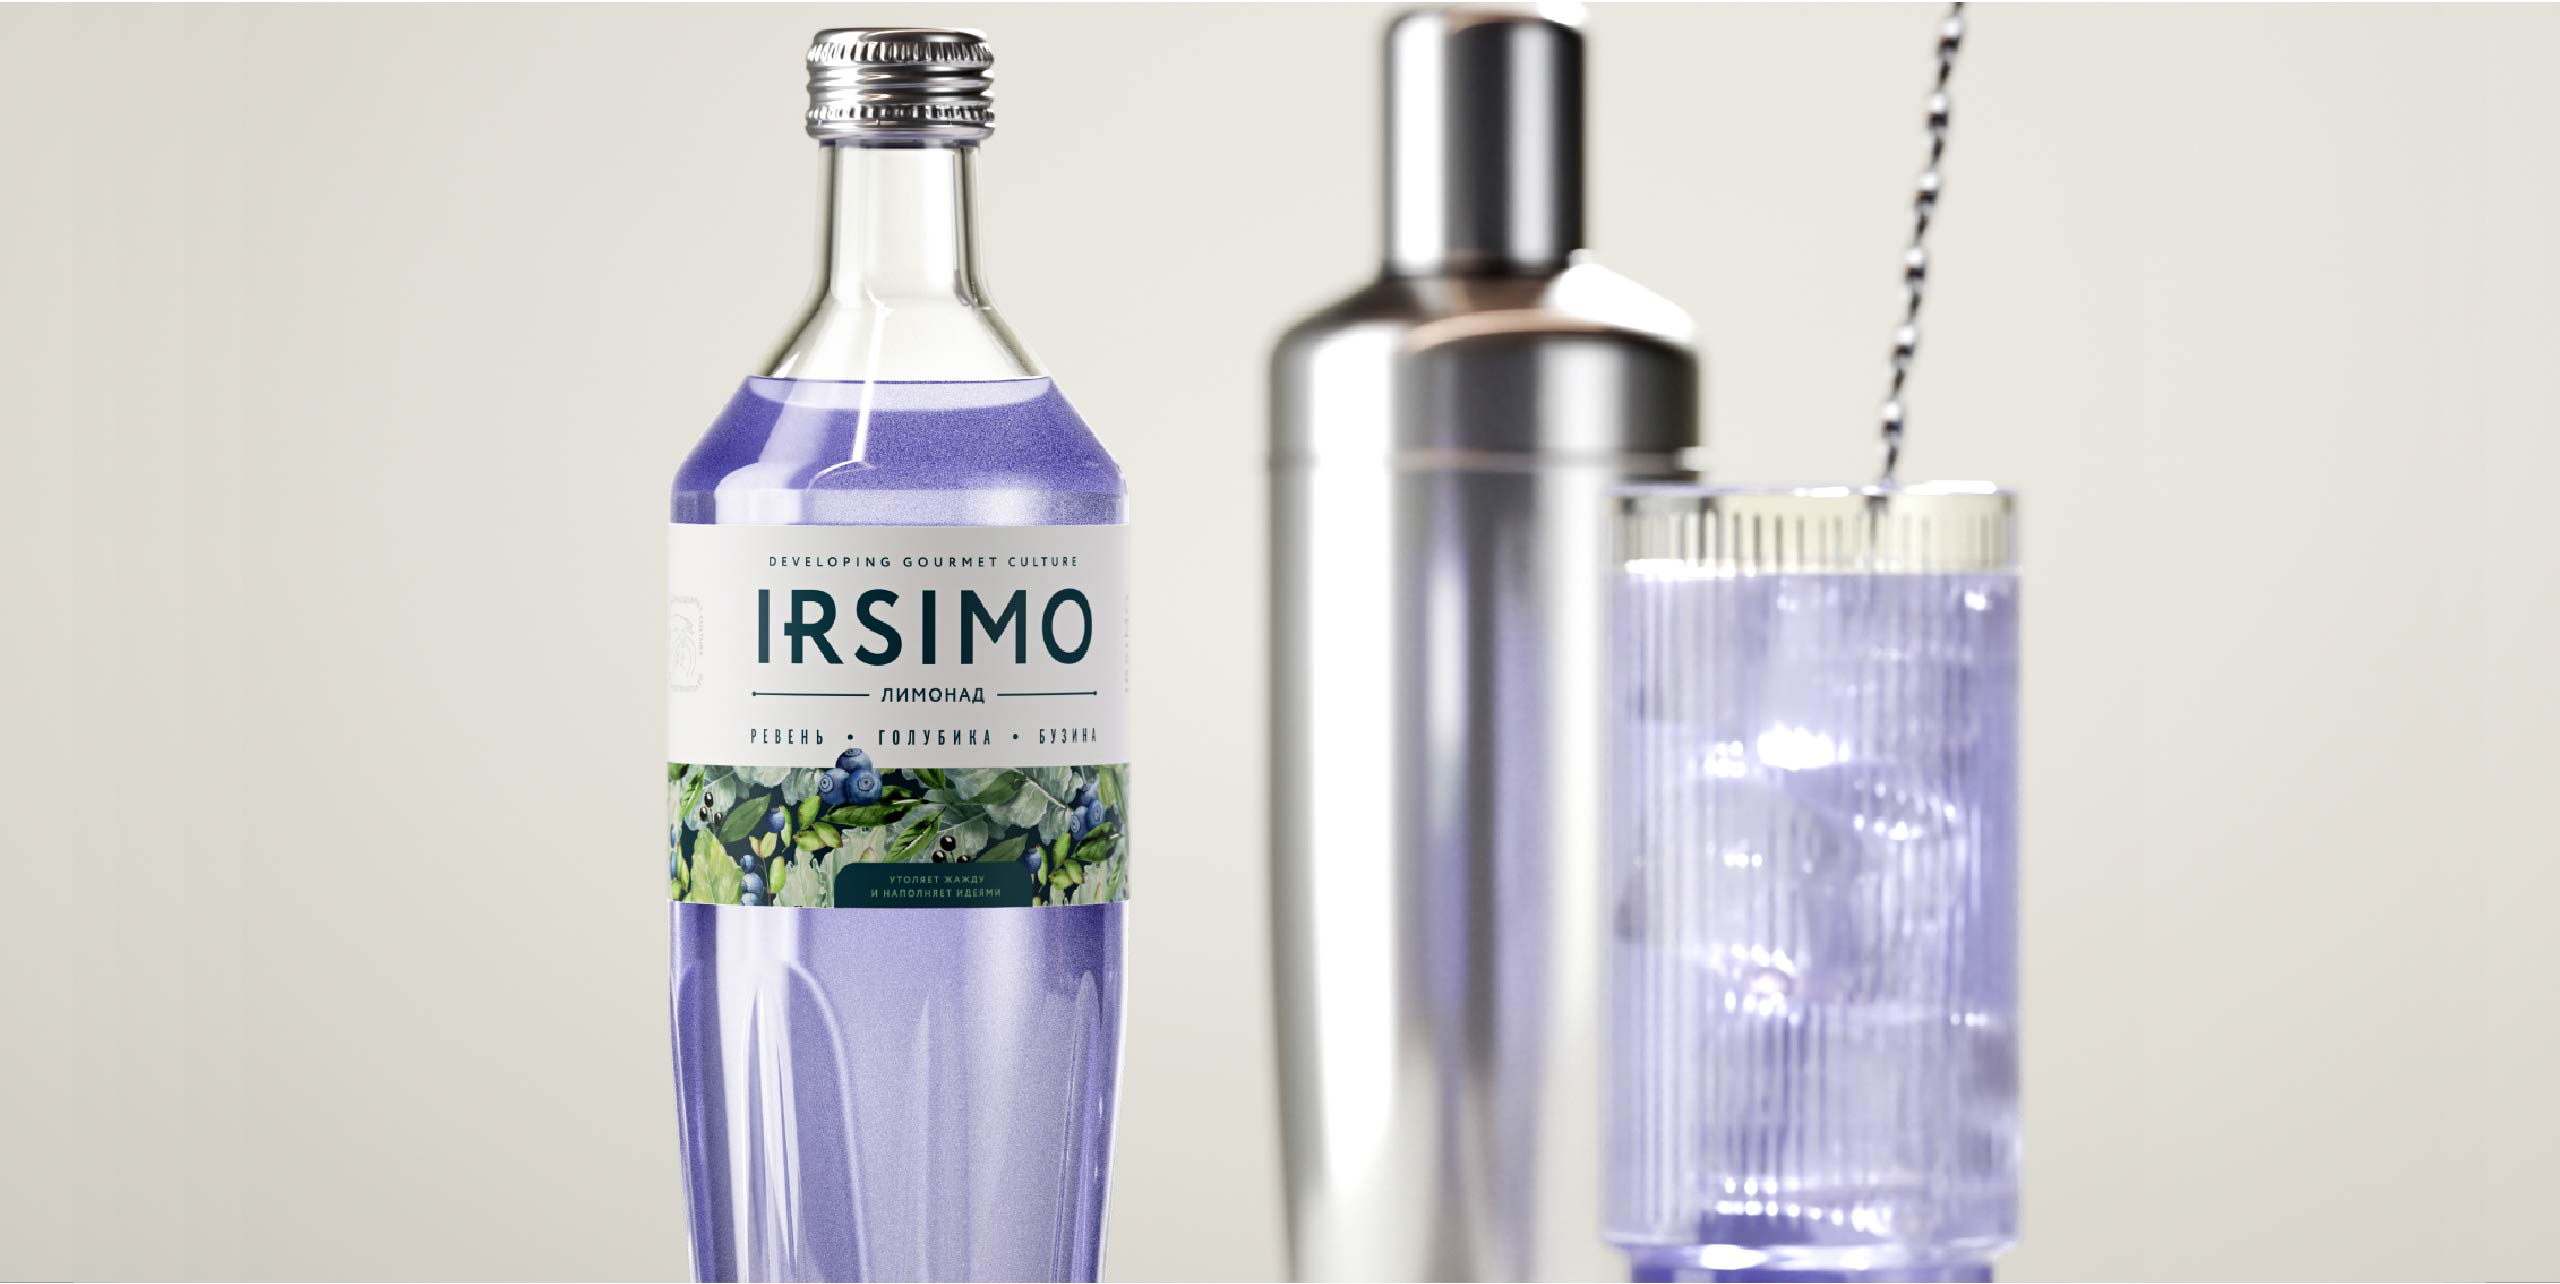 Depot agency developed label and packaging design for the brand Irsimo